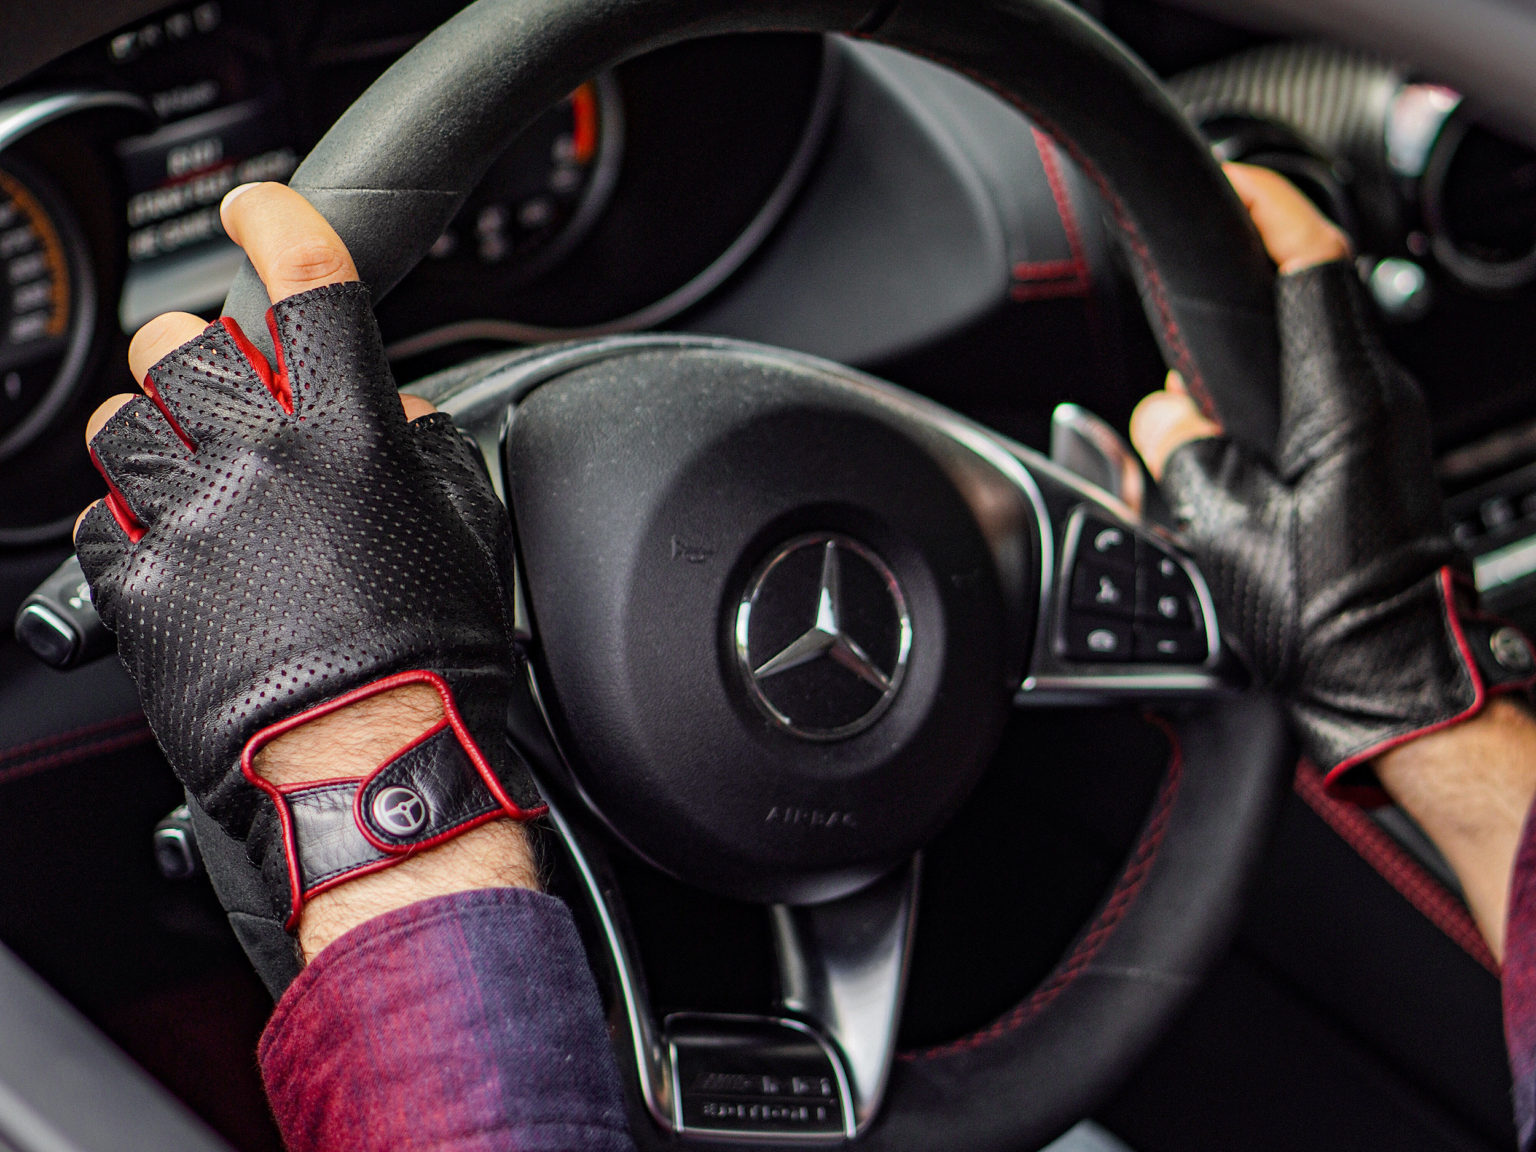 The Outlierman is offering two new varieties of driving gloves